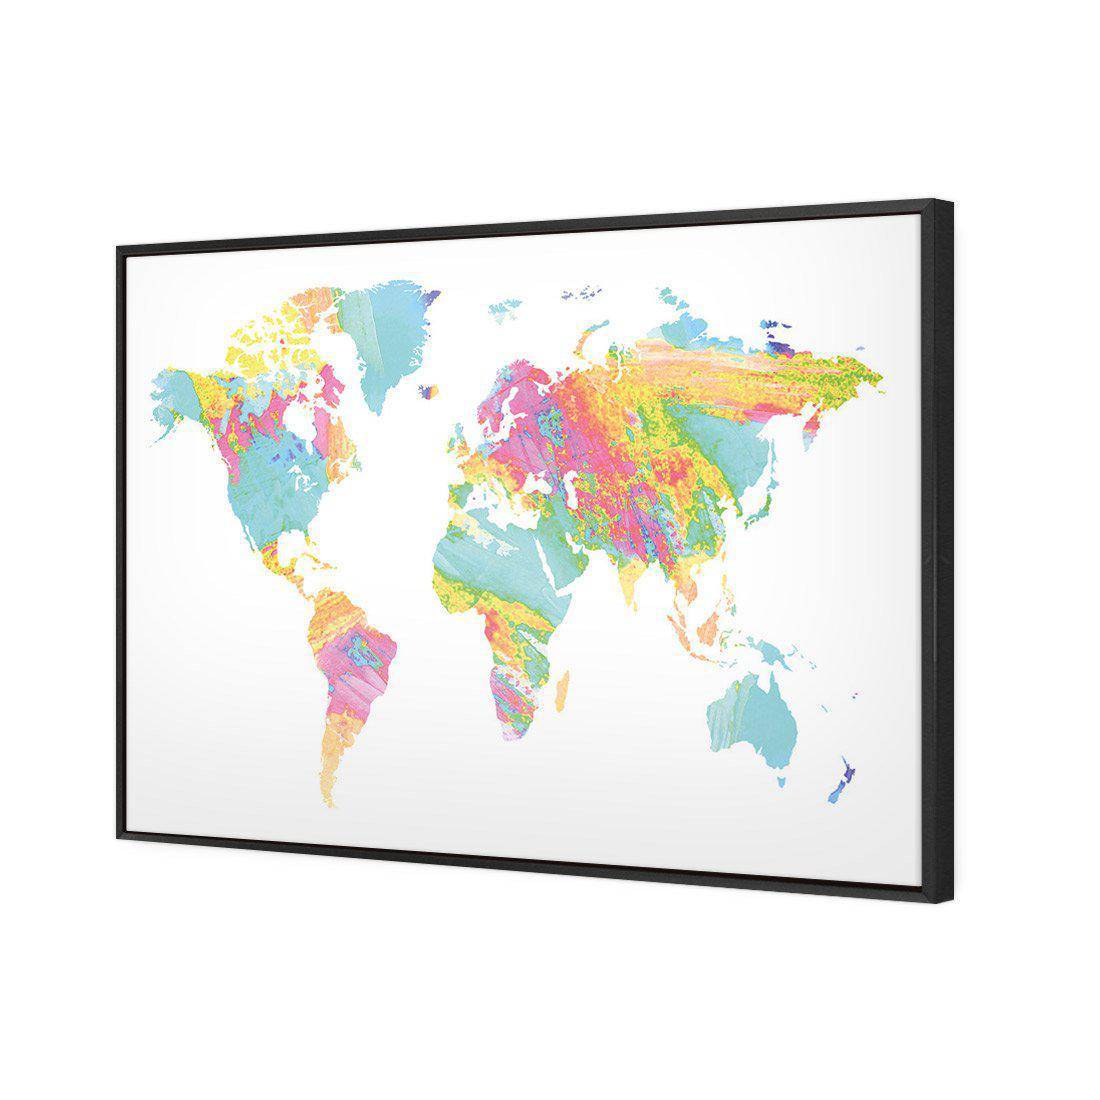 Painted Map Of The World, Pastel Canvas Art-Canvas-Wall Art Designs-45x30cm-Canvas - Black Frame-Wall Art Designs